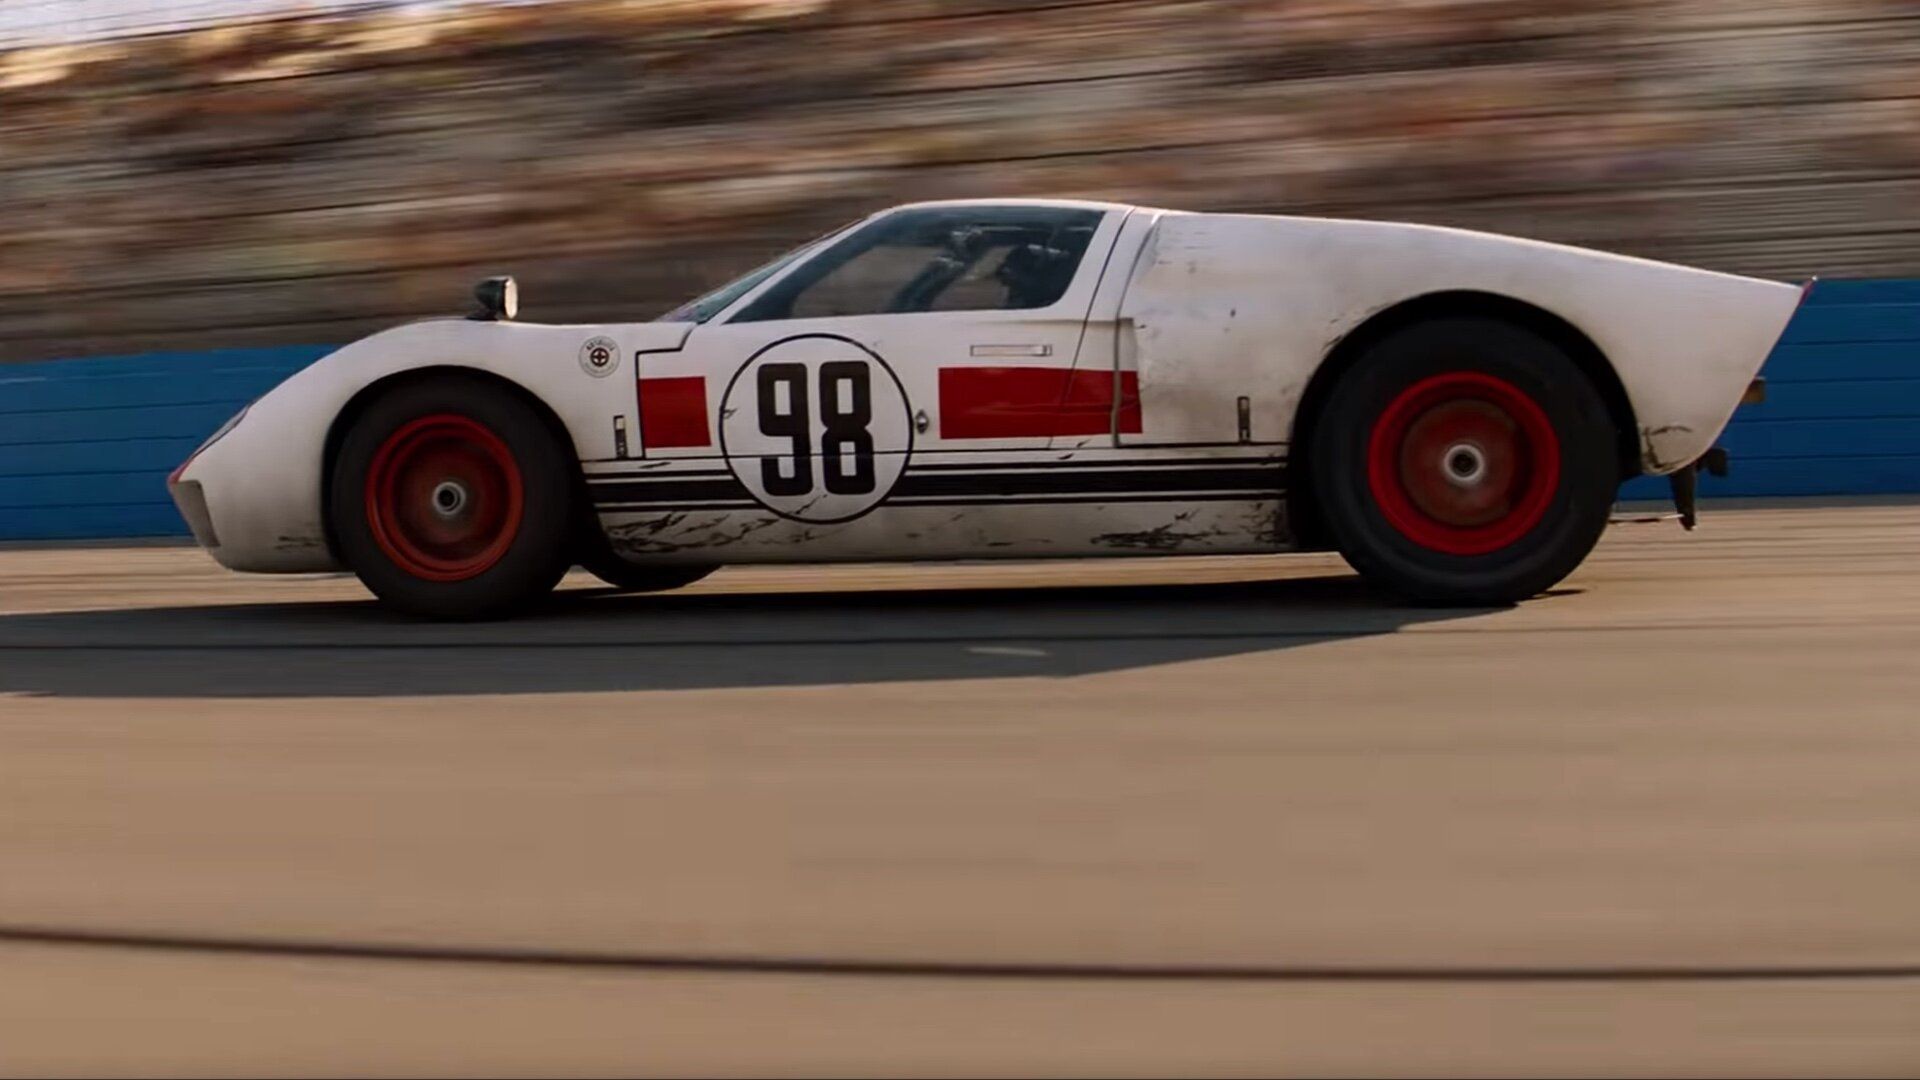 FORD V FARRARI New Featurette Revealed The Classic Underdog Story